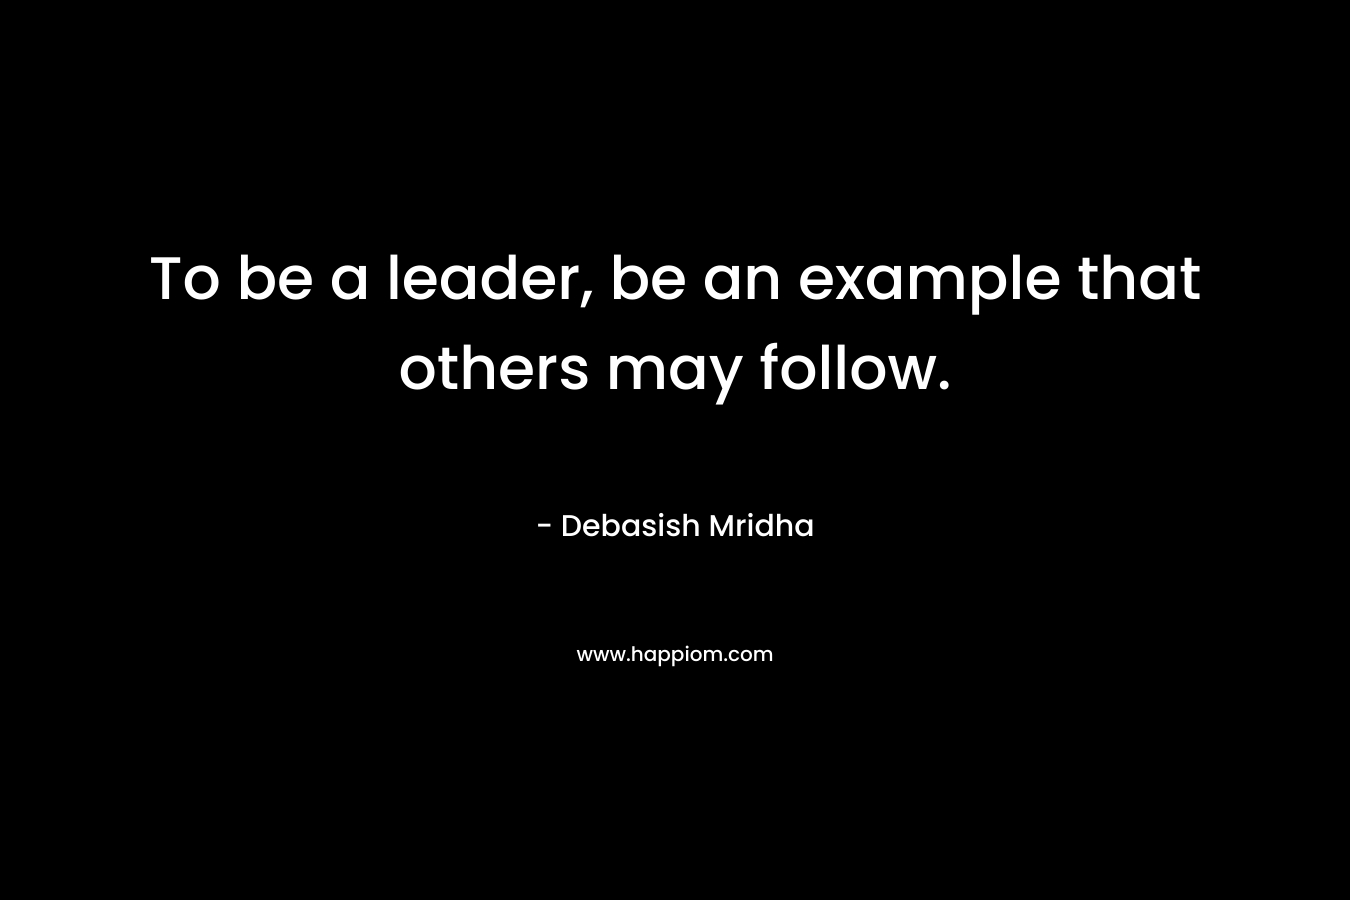 To be a leader, be an example that others may follow. – Debasish Mridha